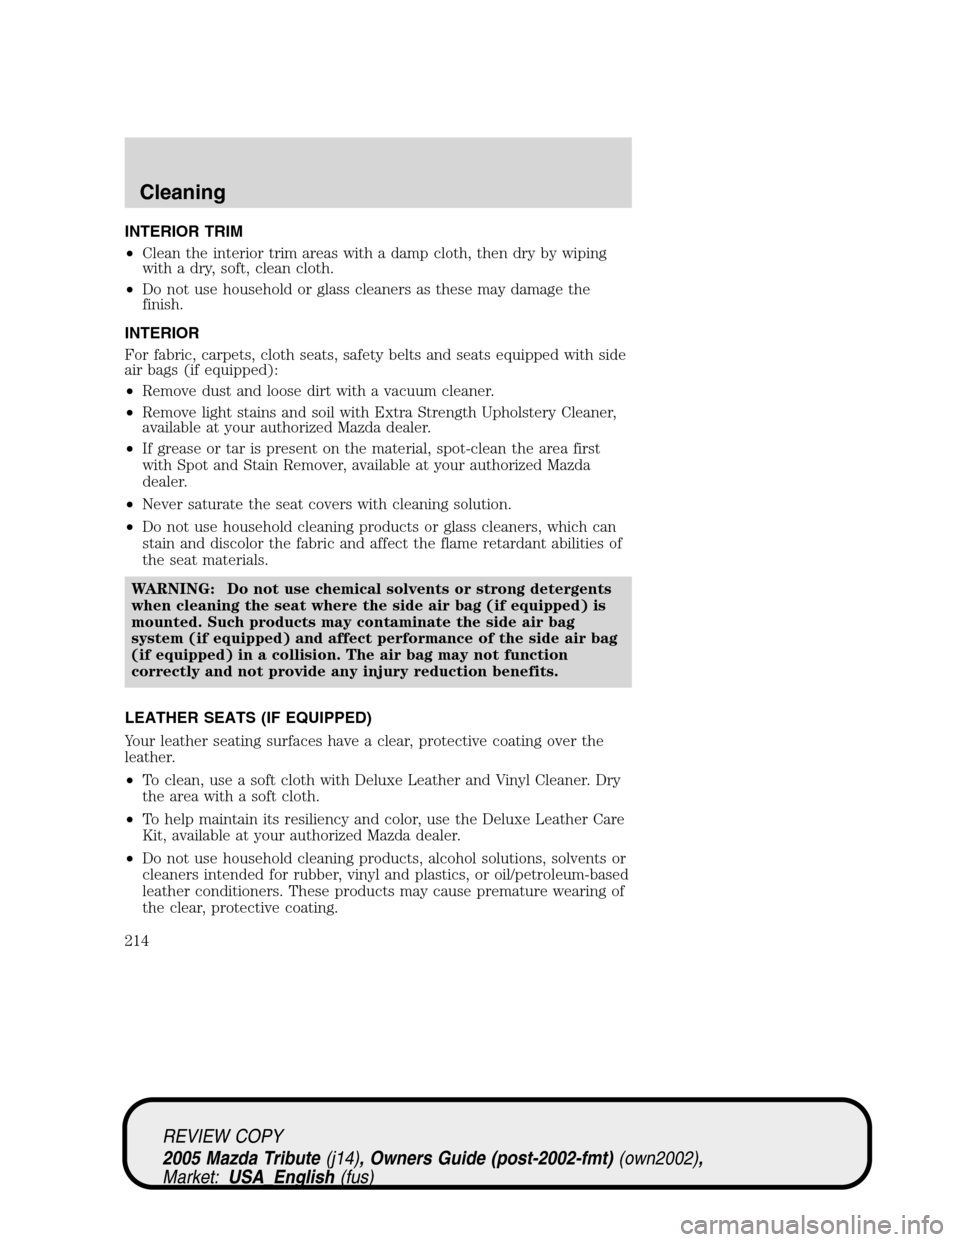 MAZDA MODEL TRIBUTE 2005  Owners Manual (in English) INTERIOR TRIM
•Clean the interior trim areas with a damp cloth, then dry by wiping
with a dry, soft, clean cloth.
•Do not use household or glass cleaners as these may damage the
finish.
INTERIOR
F